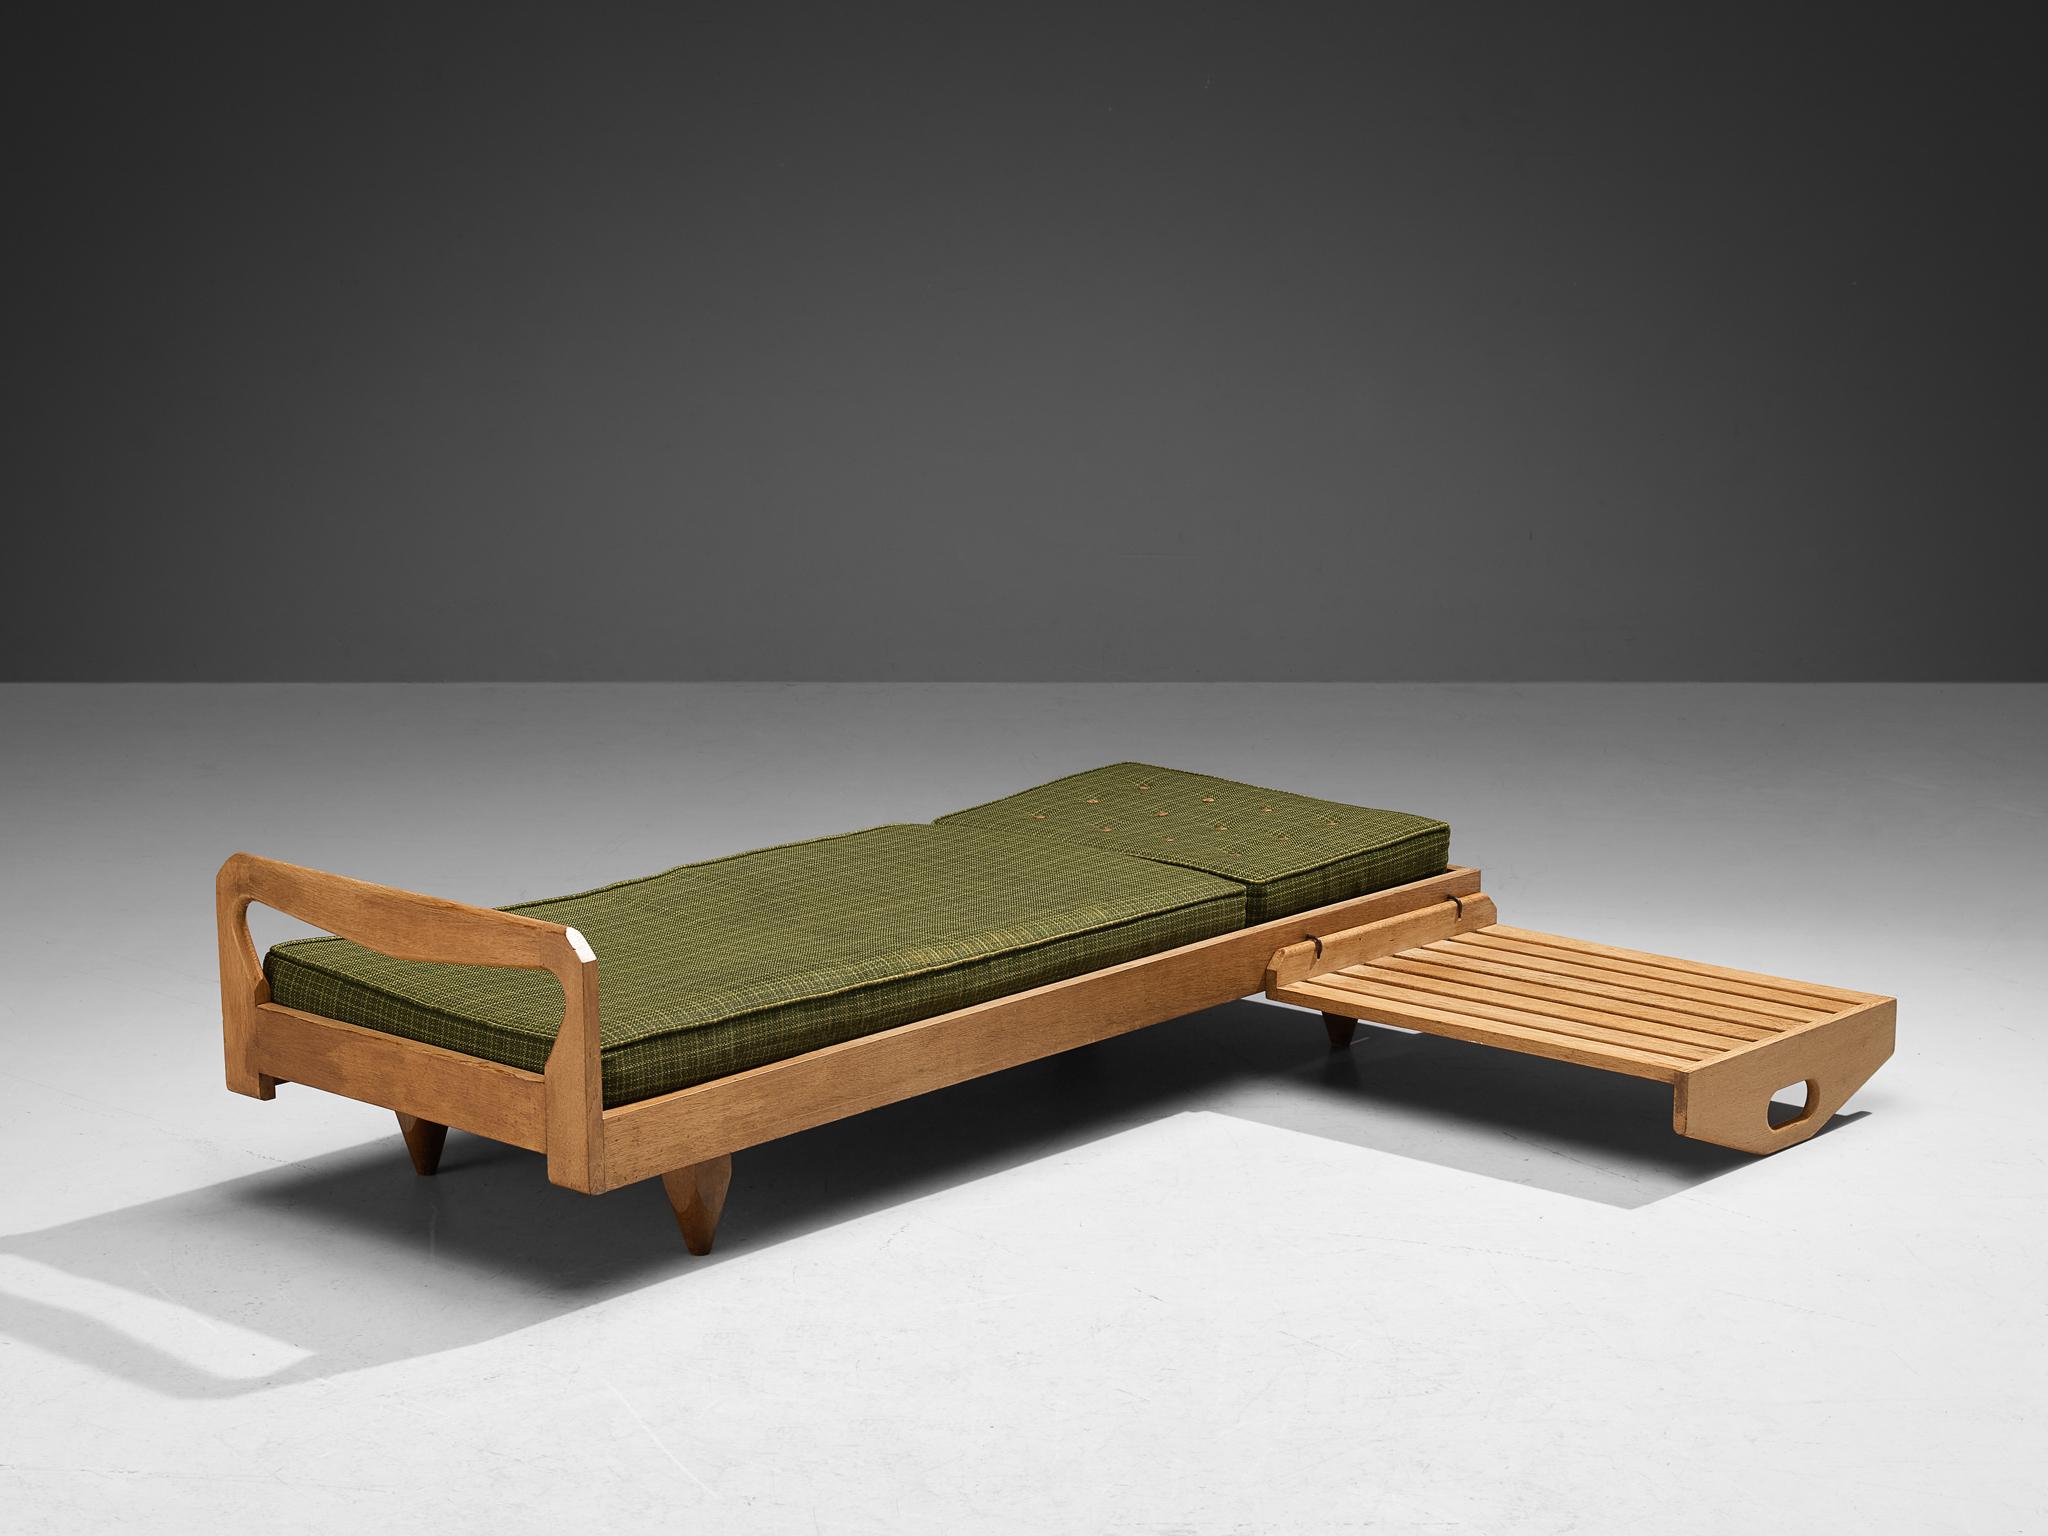 Guillerme et Chambron for Votre Maison, daybed, oak and fabric, France, 1960s.

Sturdy daybed by Guillerme and Chambron executed in solid oak with the typical characteristic decorative details and sculpted forms of the legs. The designs of the